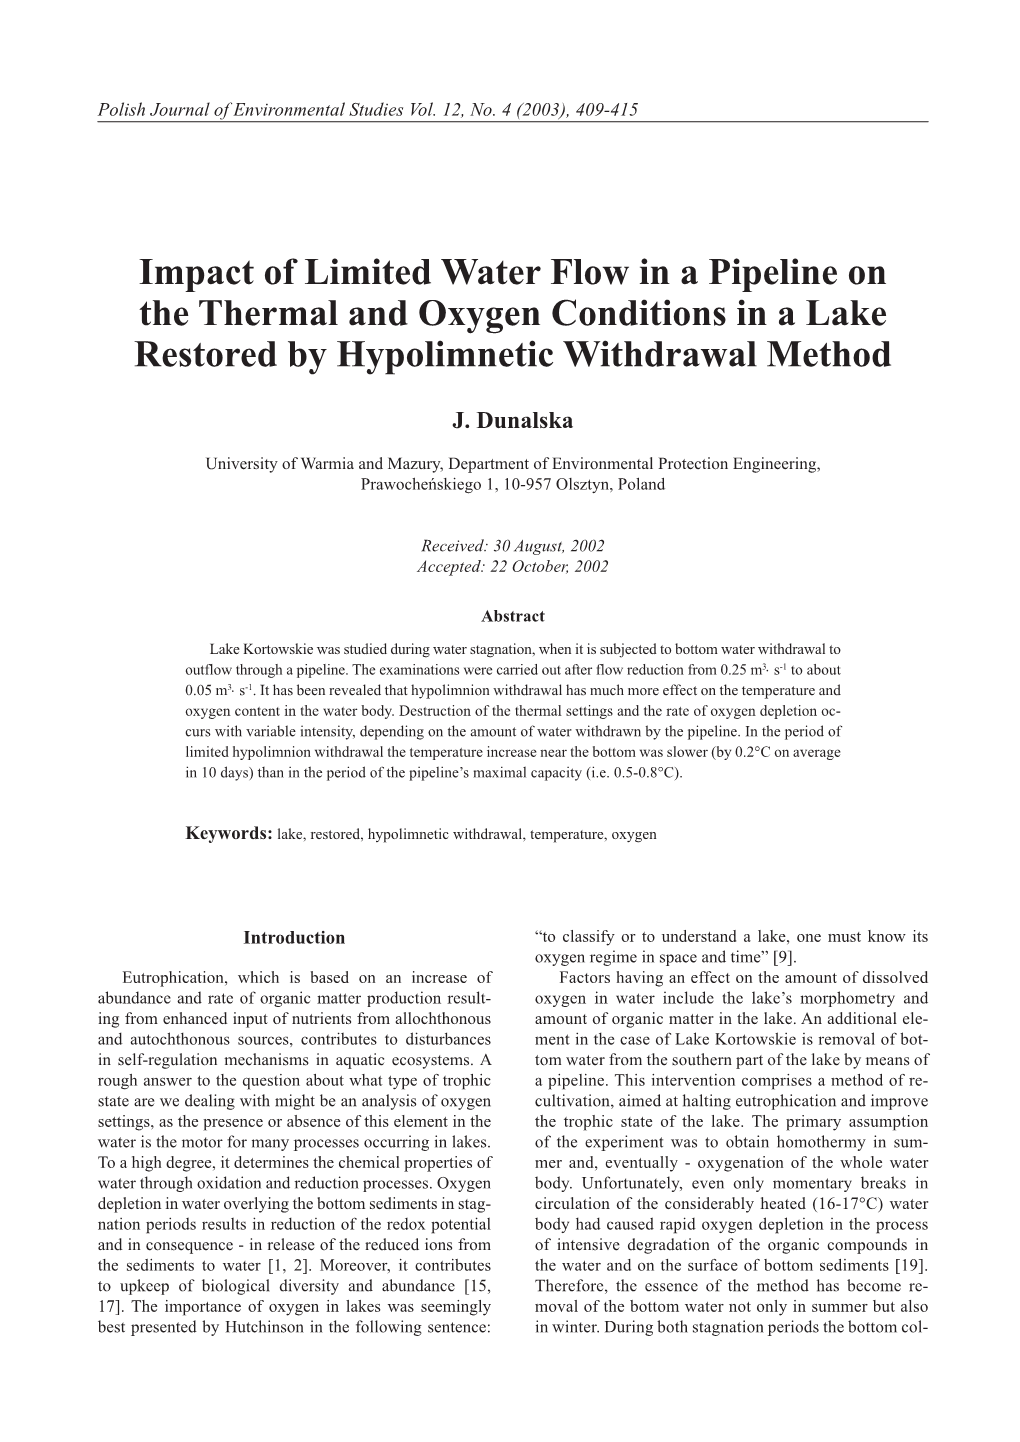 Impact of Limited Water Flow in a Pipeline on the Thermal and Oxygen Conditions in a Lake Restored by Hypolimnetic Withdrawal Method